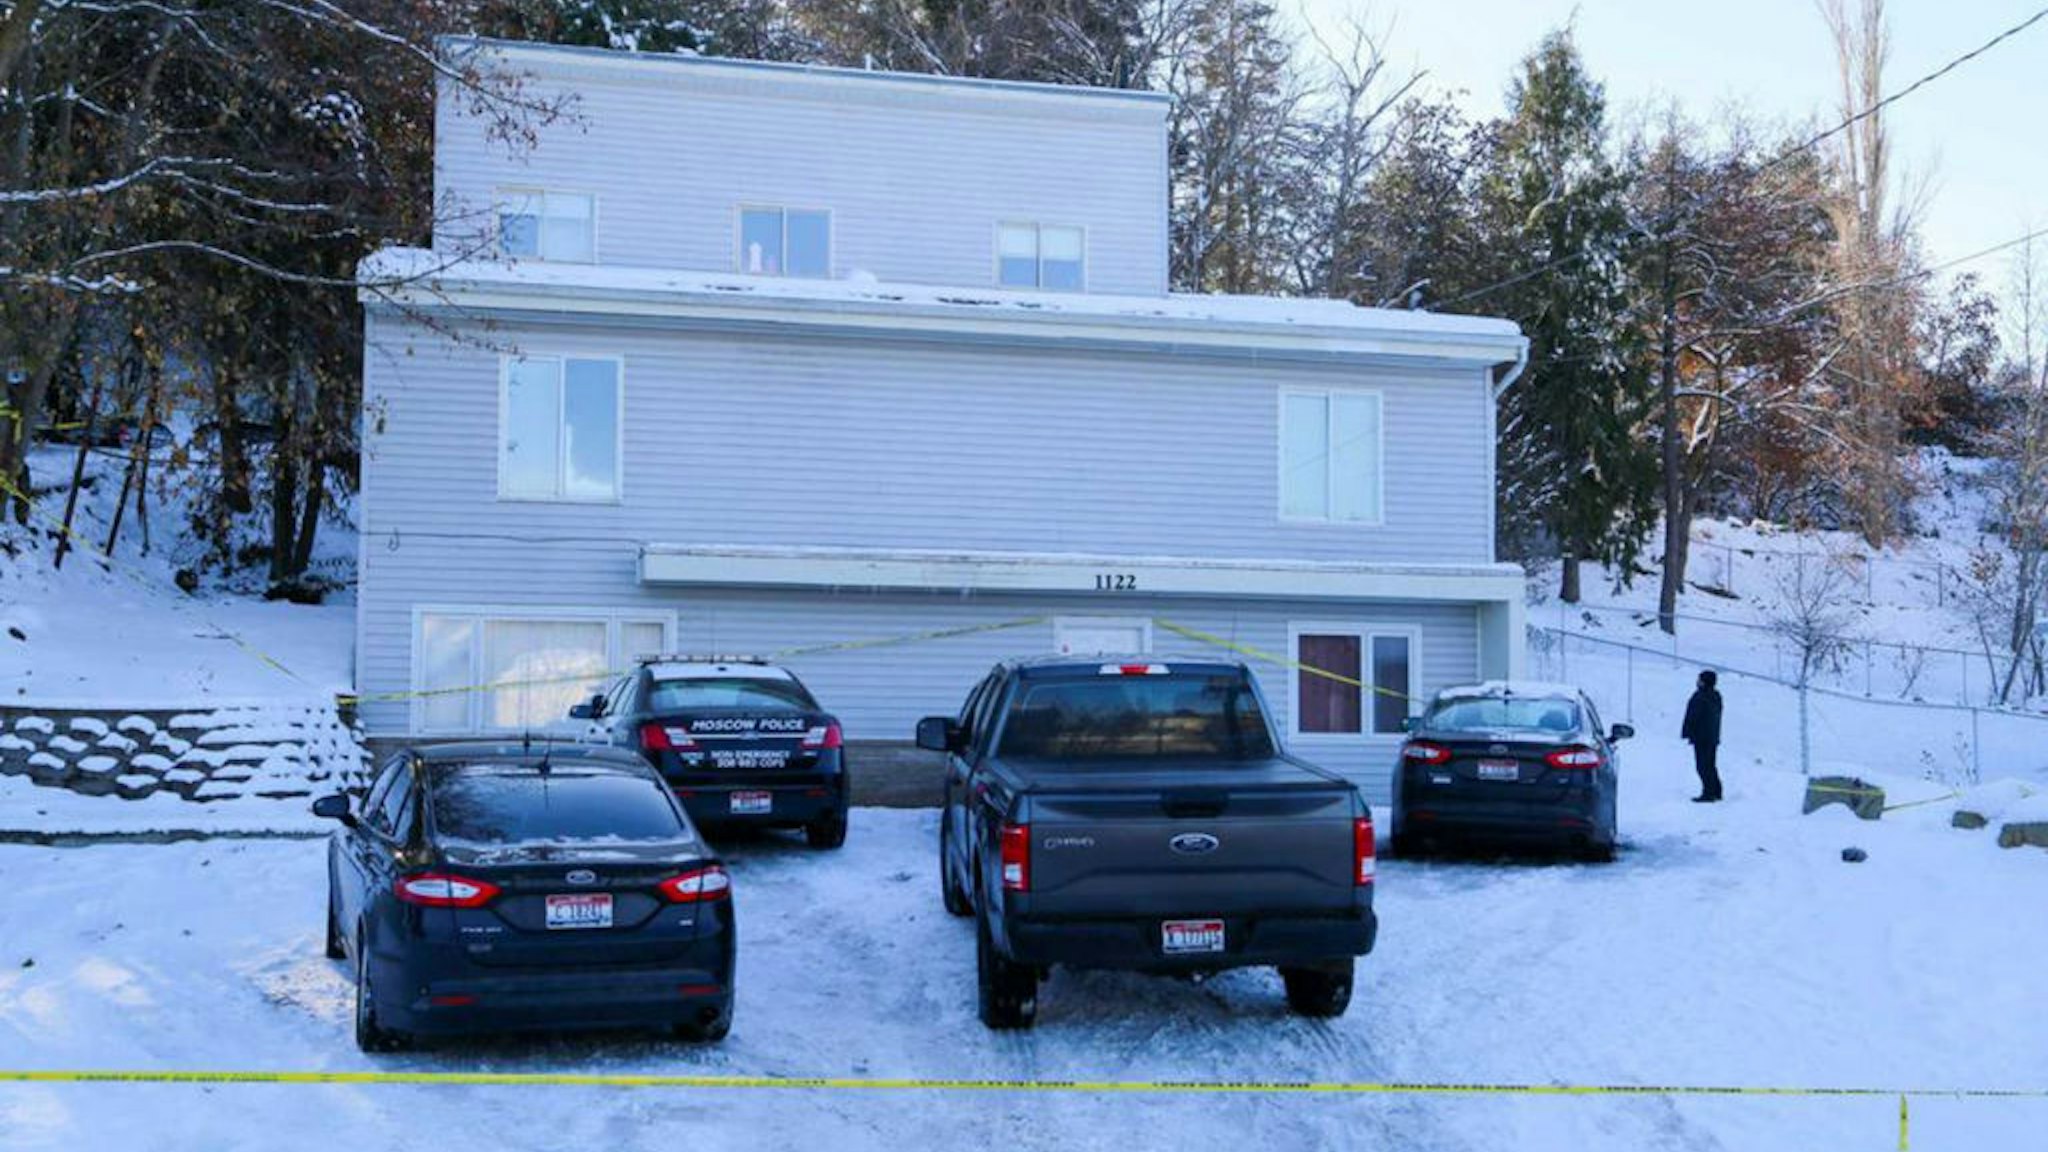 Moscow police found the bodies of four University of Idaho students at an off-campus rental home Nov. 13, 2022, at 1122 King Road in Moscow.